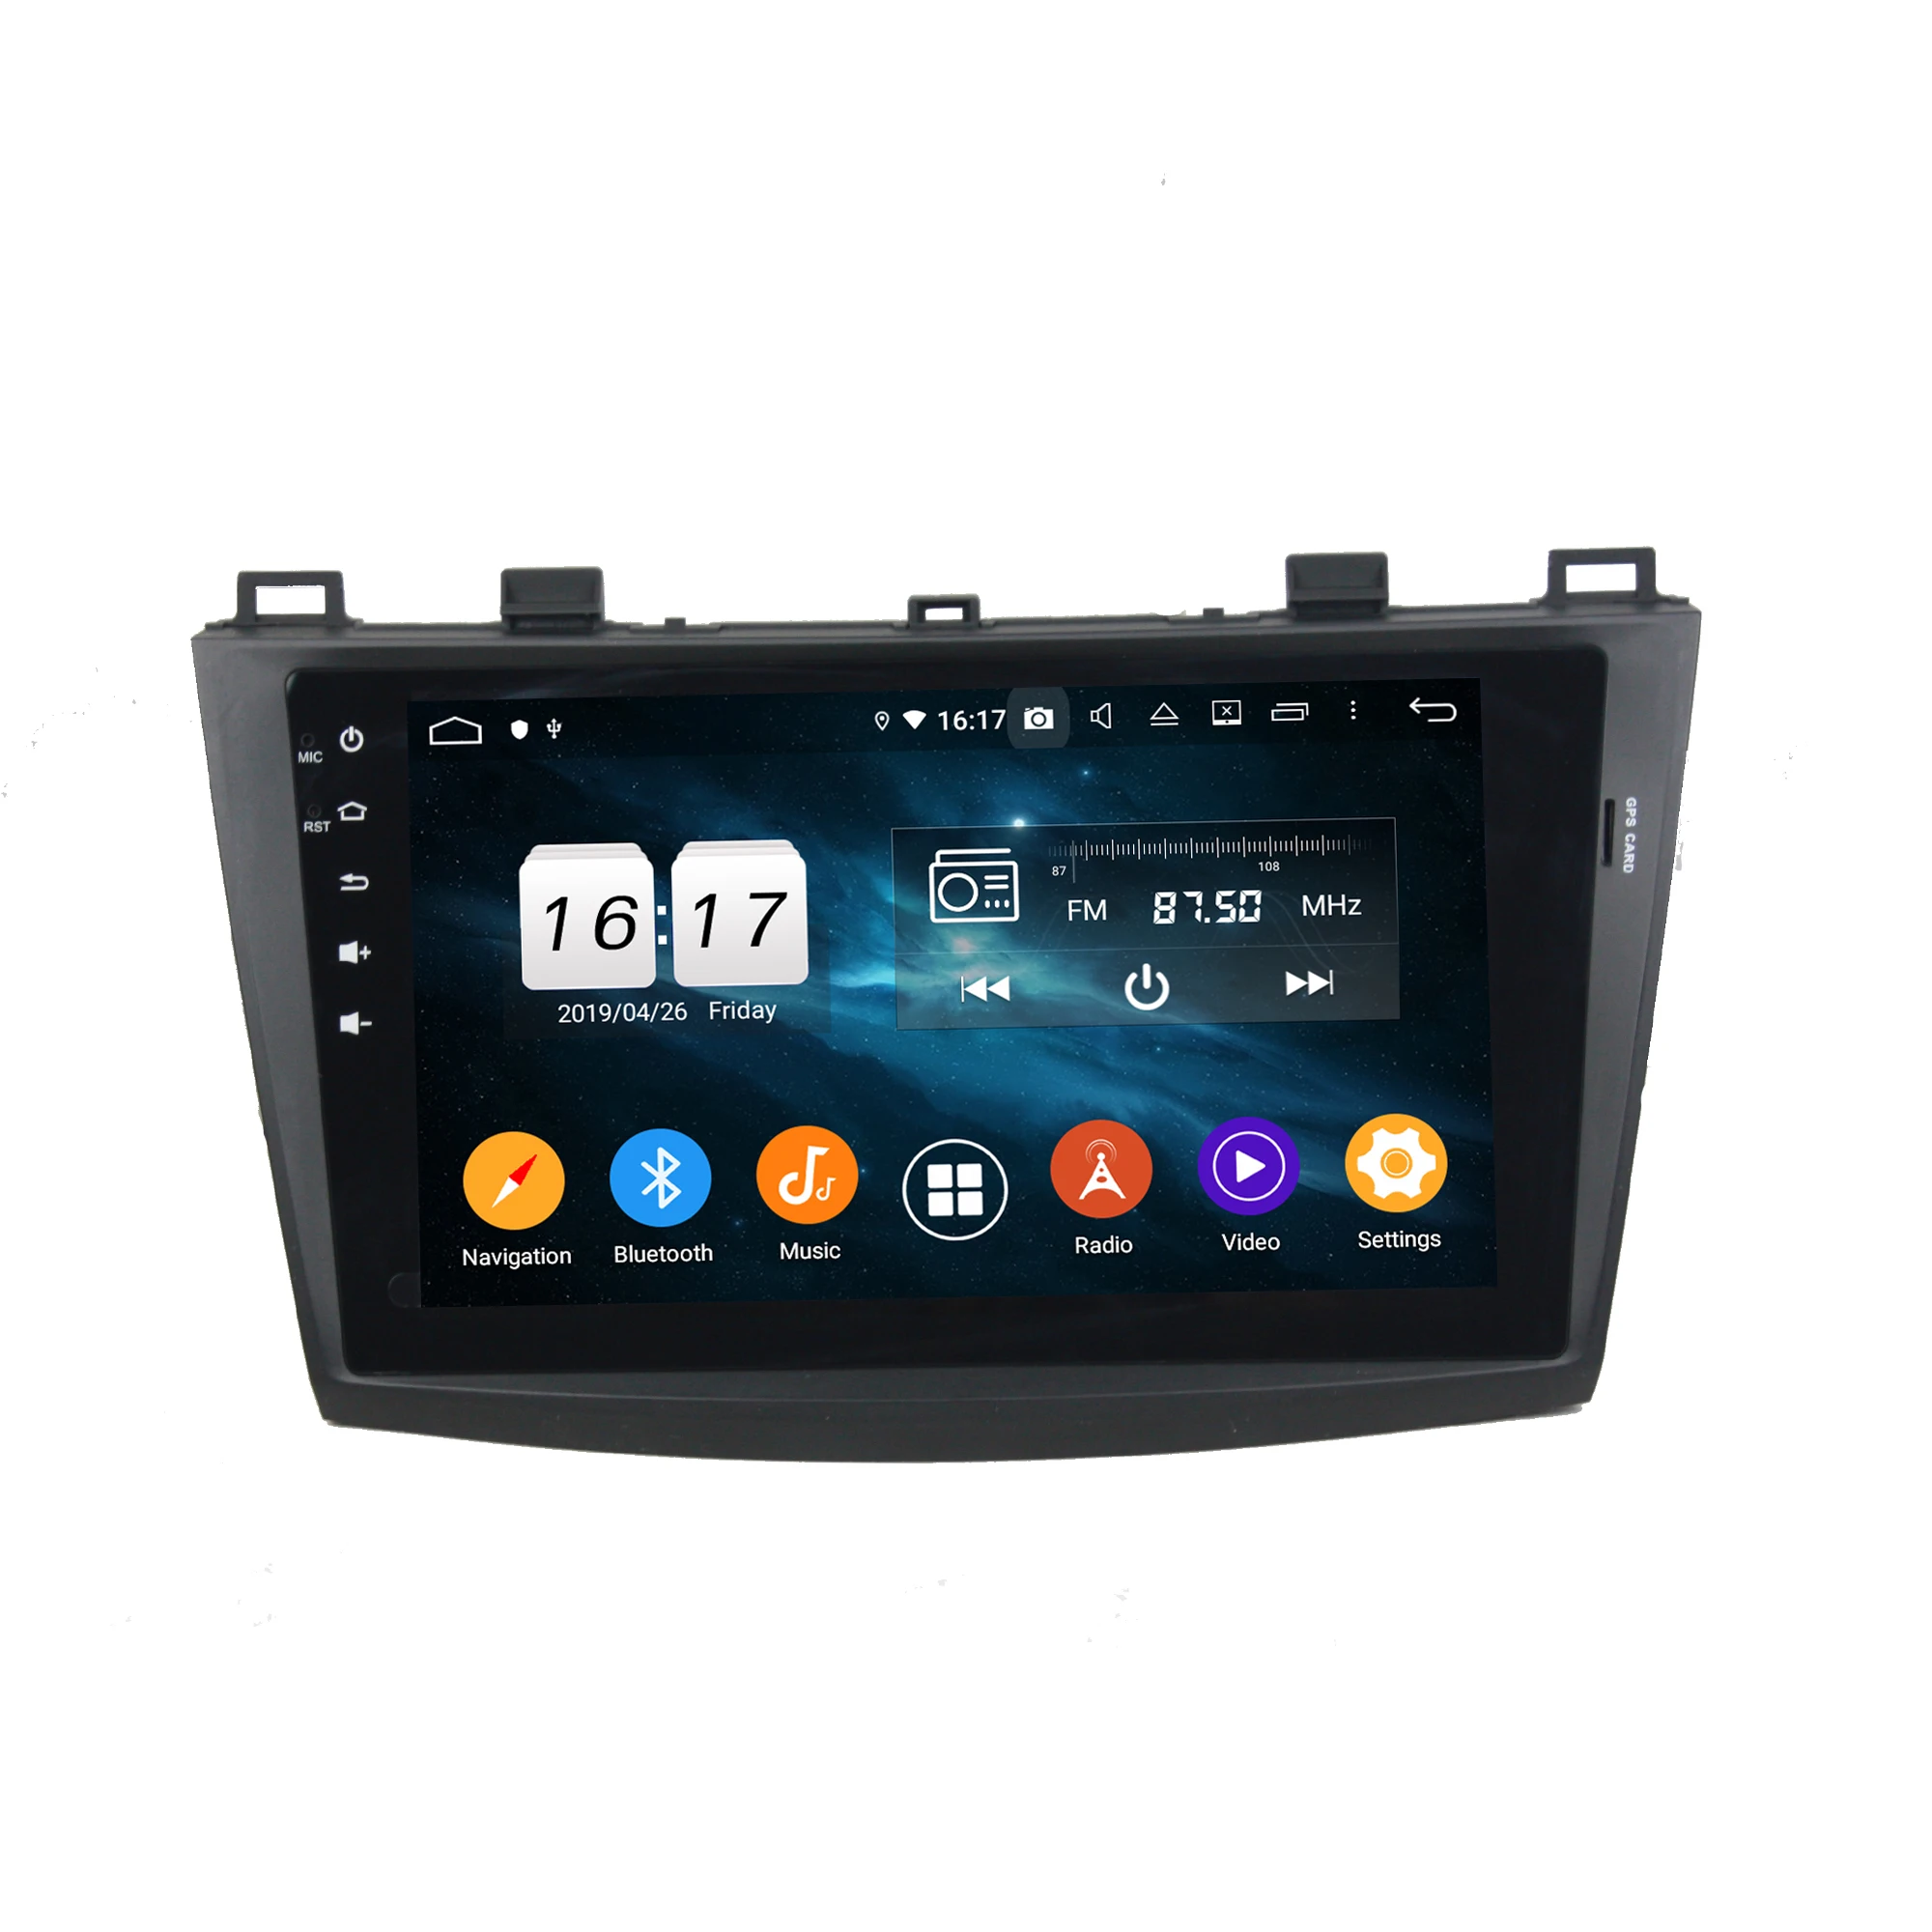 Best DSP 4GB+64GB PX5 9" Android 9.0 Car DVD GPS Glonass for Mazda 3 2010 2011 2012 Stereo Radio Bluetooth 4.2 WIFI Mirror-link 1